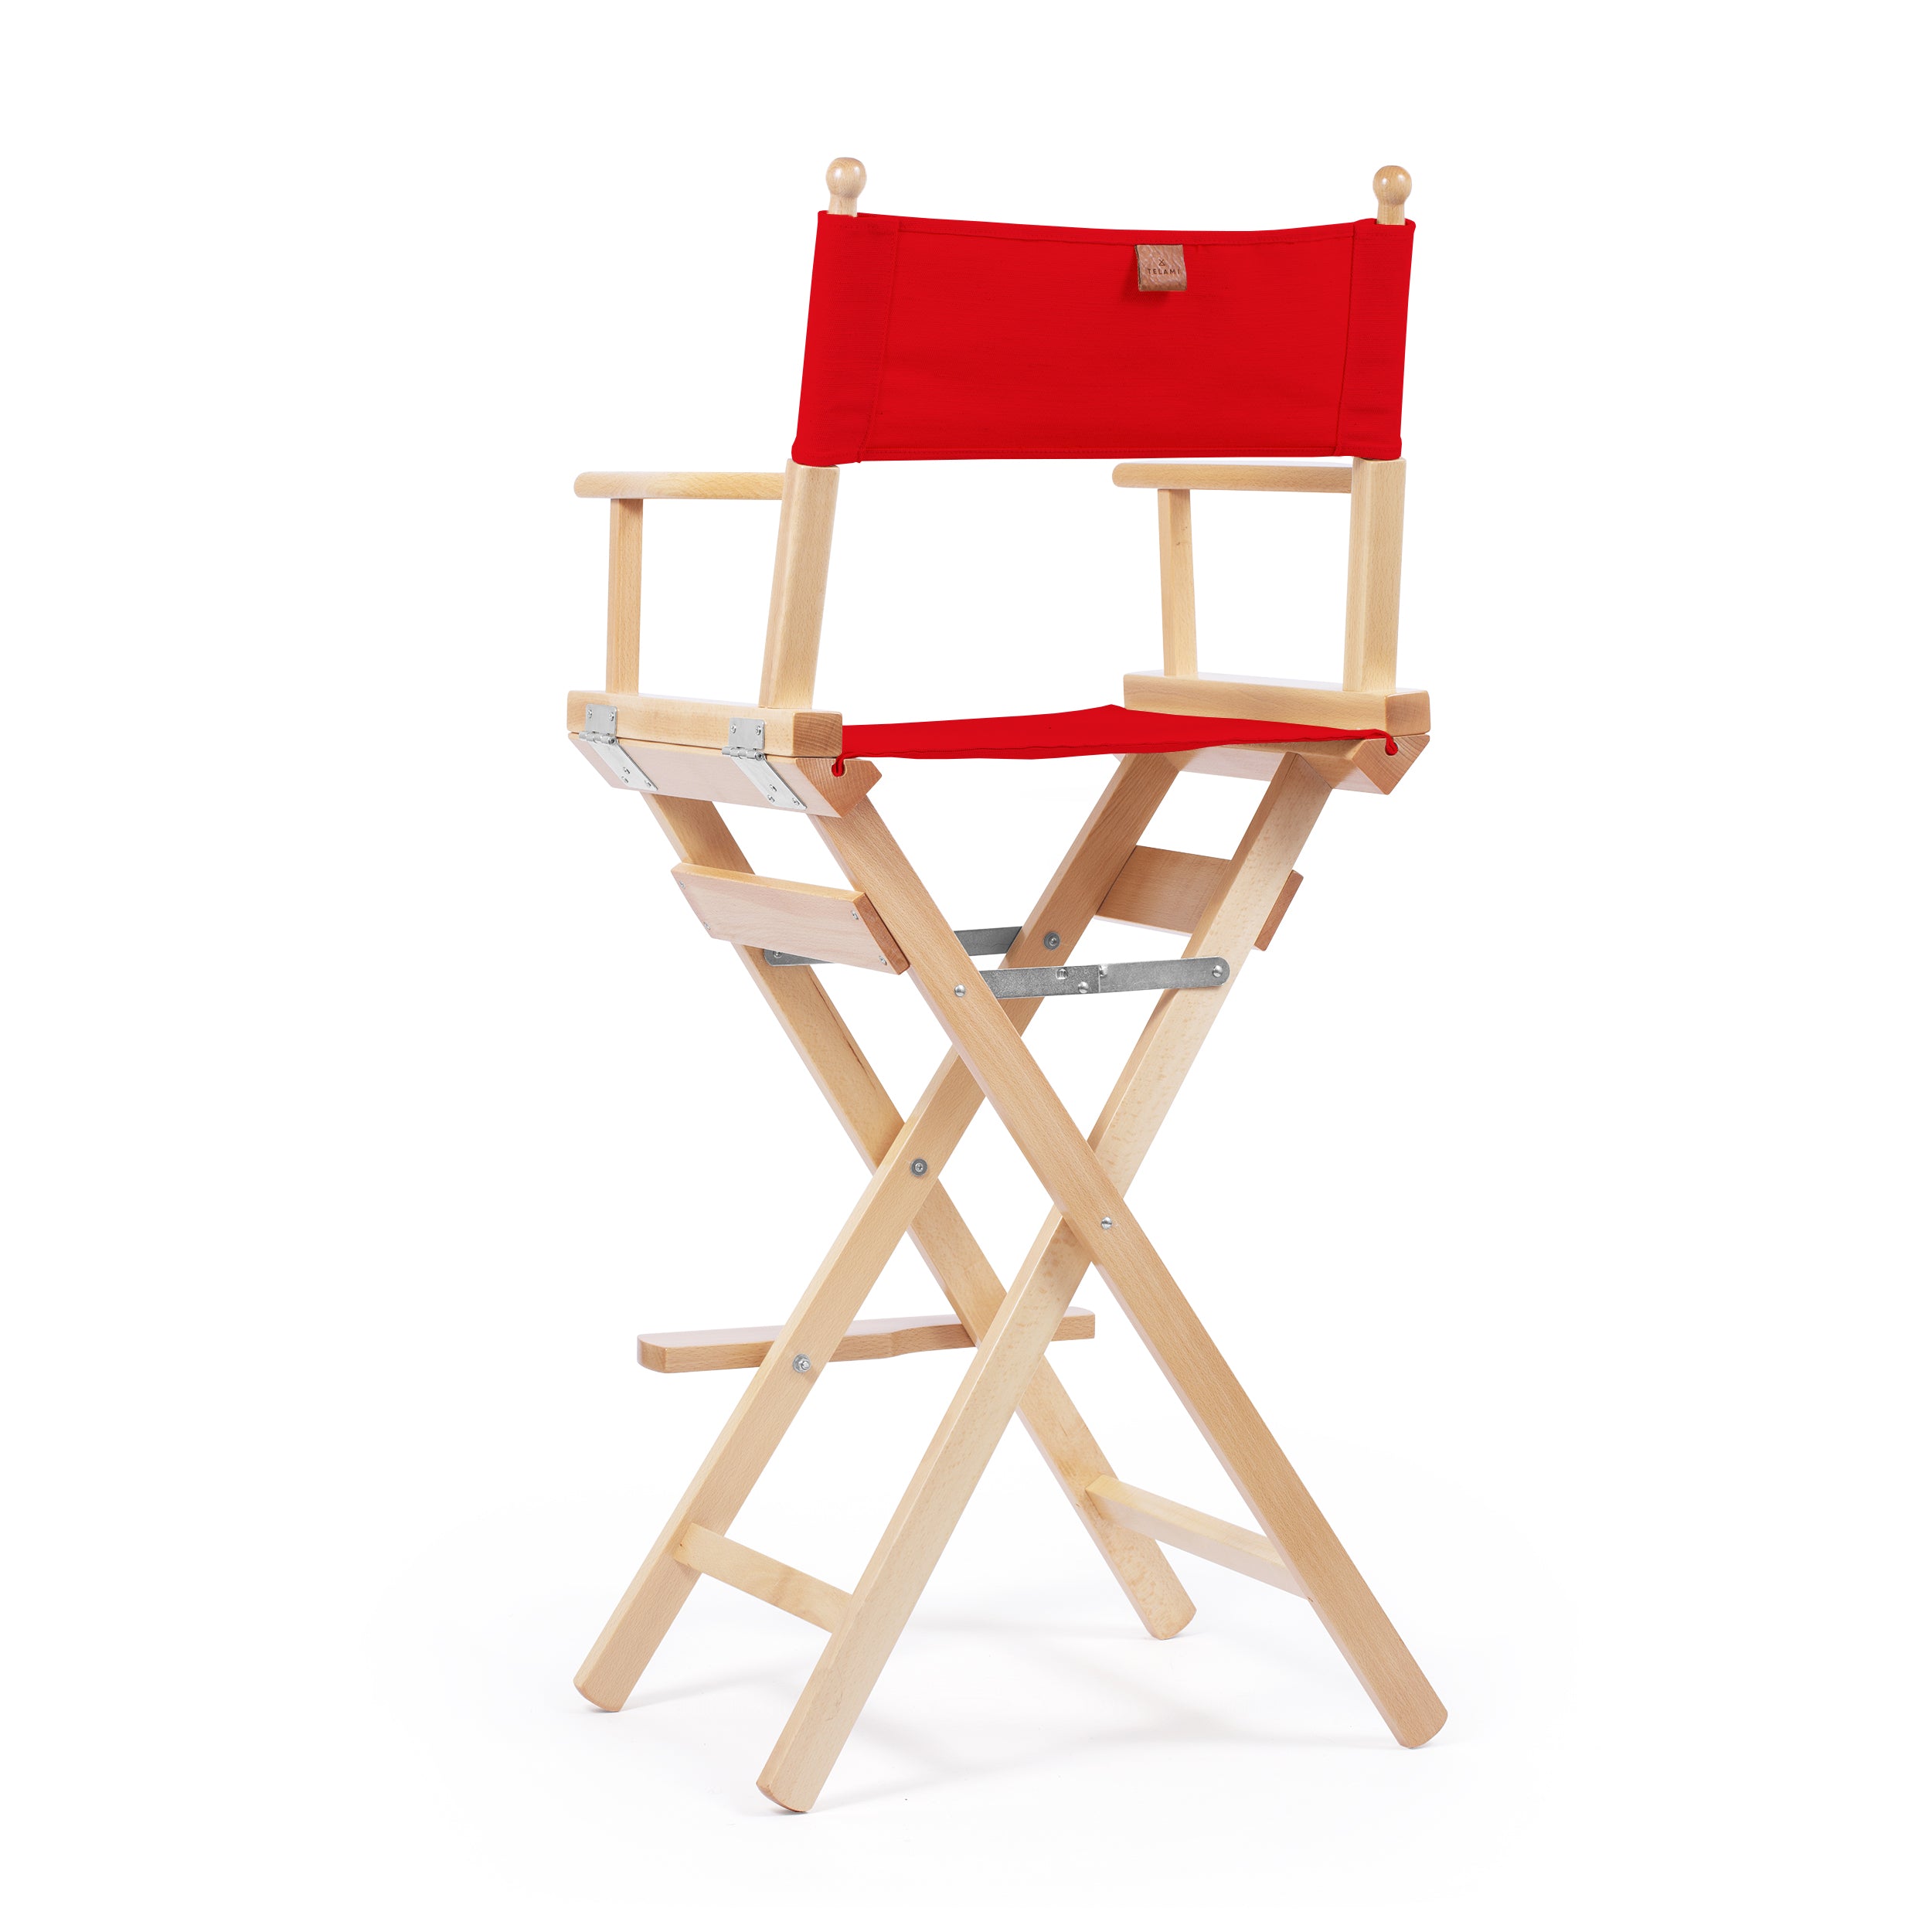 Director's Chair Make-up Primary Red Telami waterproof Design Made in Italy outdoor furniture patio chairs natural frame